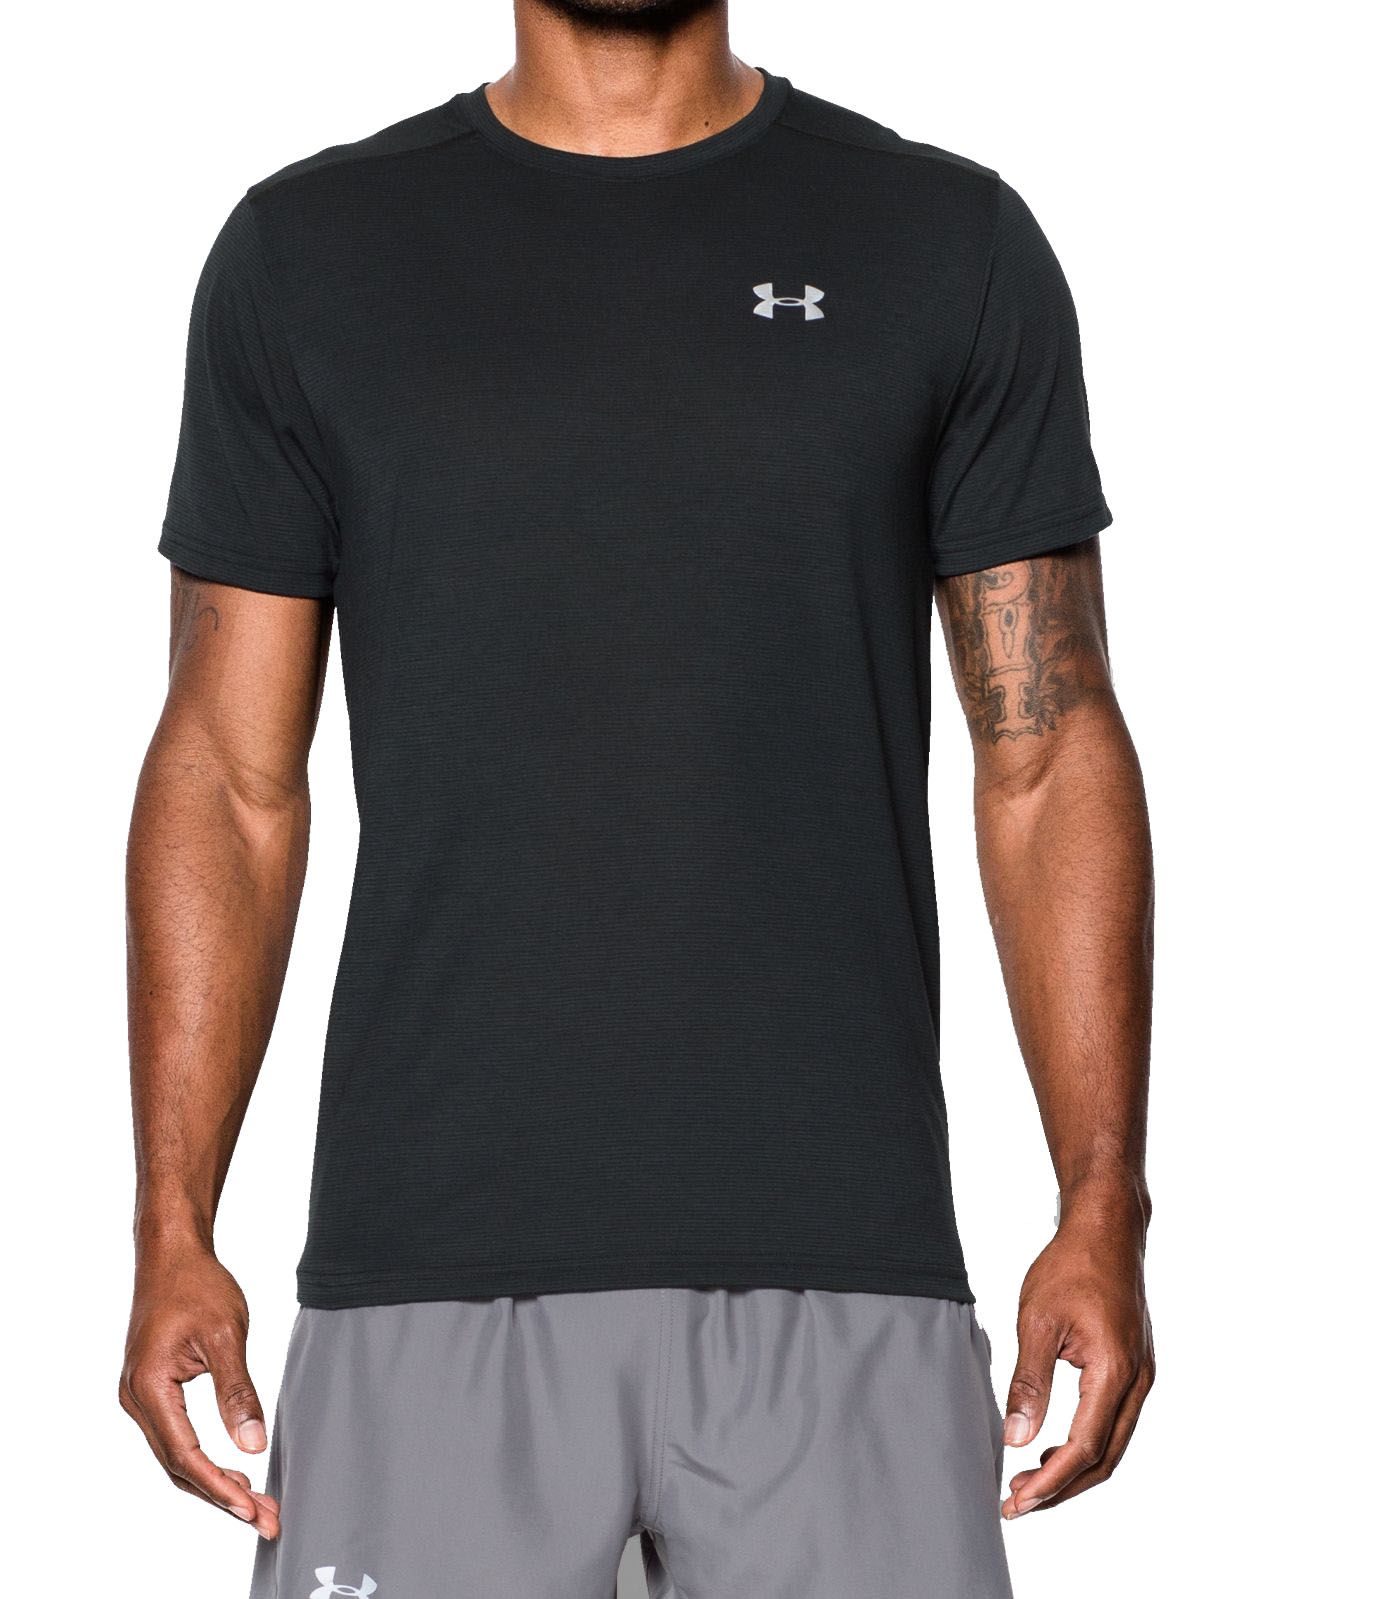 UNDER ARMOUR T-SHIRTS - Buy UNDER ARMOUR T-SHIRTS Online at Low Price ...